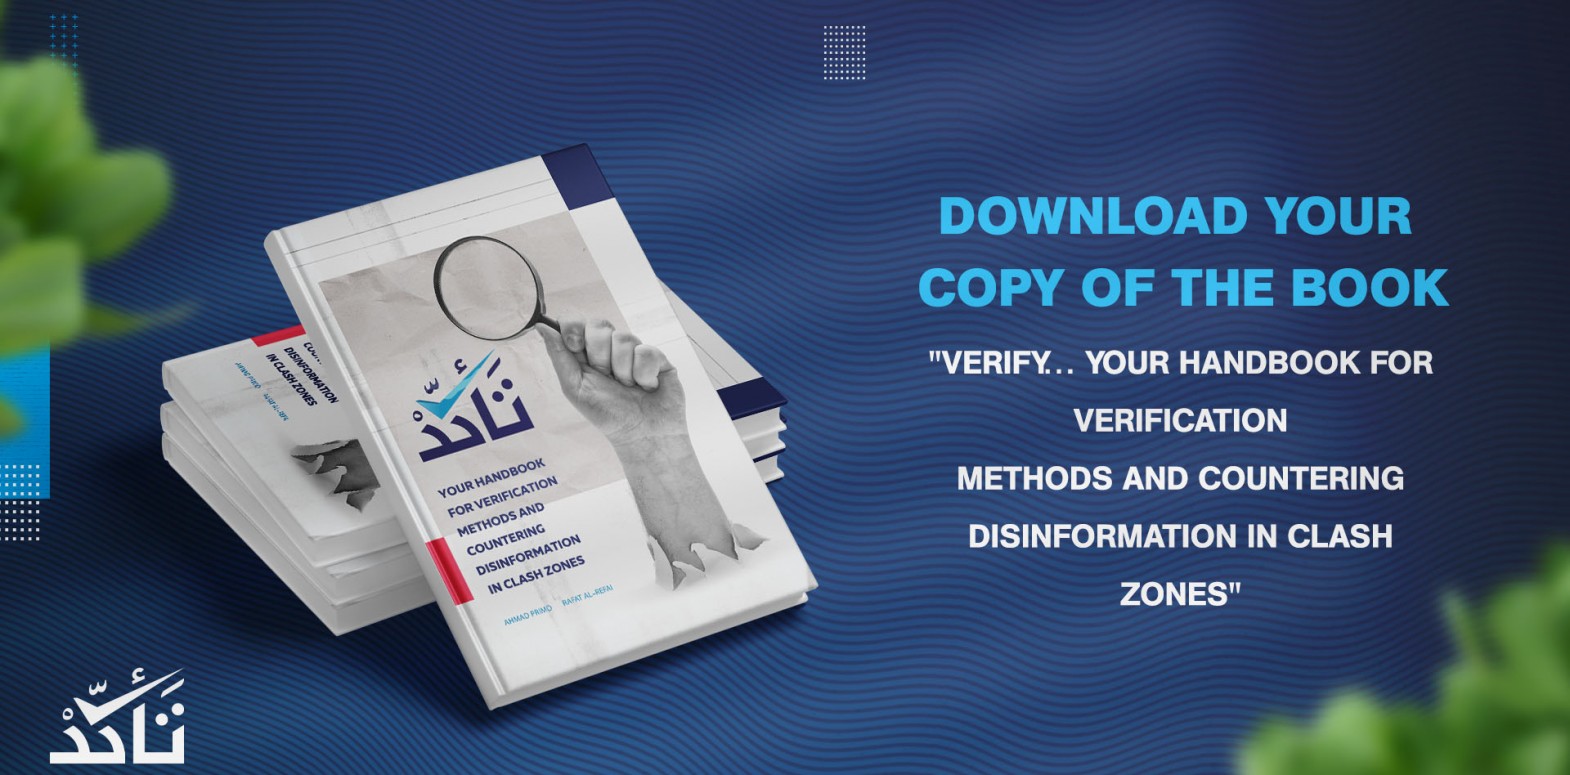 Download Verify's Book for Verification Methods and Countering Disinformation in Clash Zones